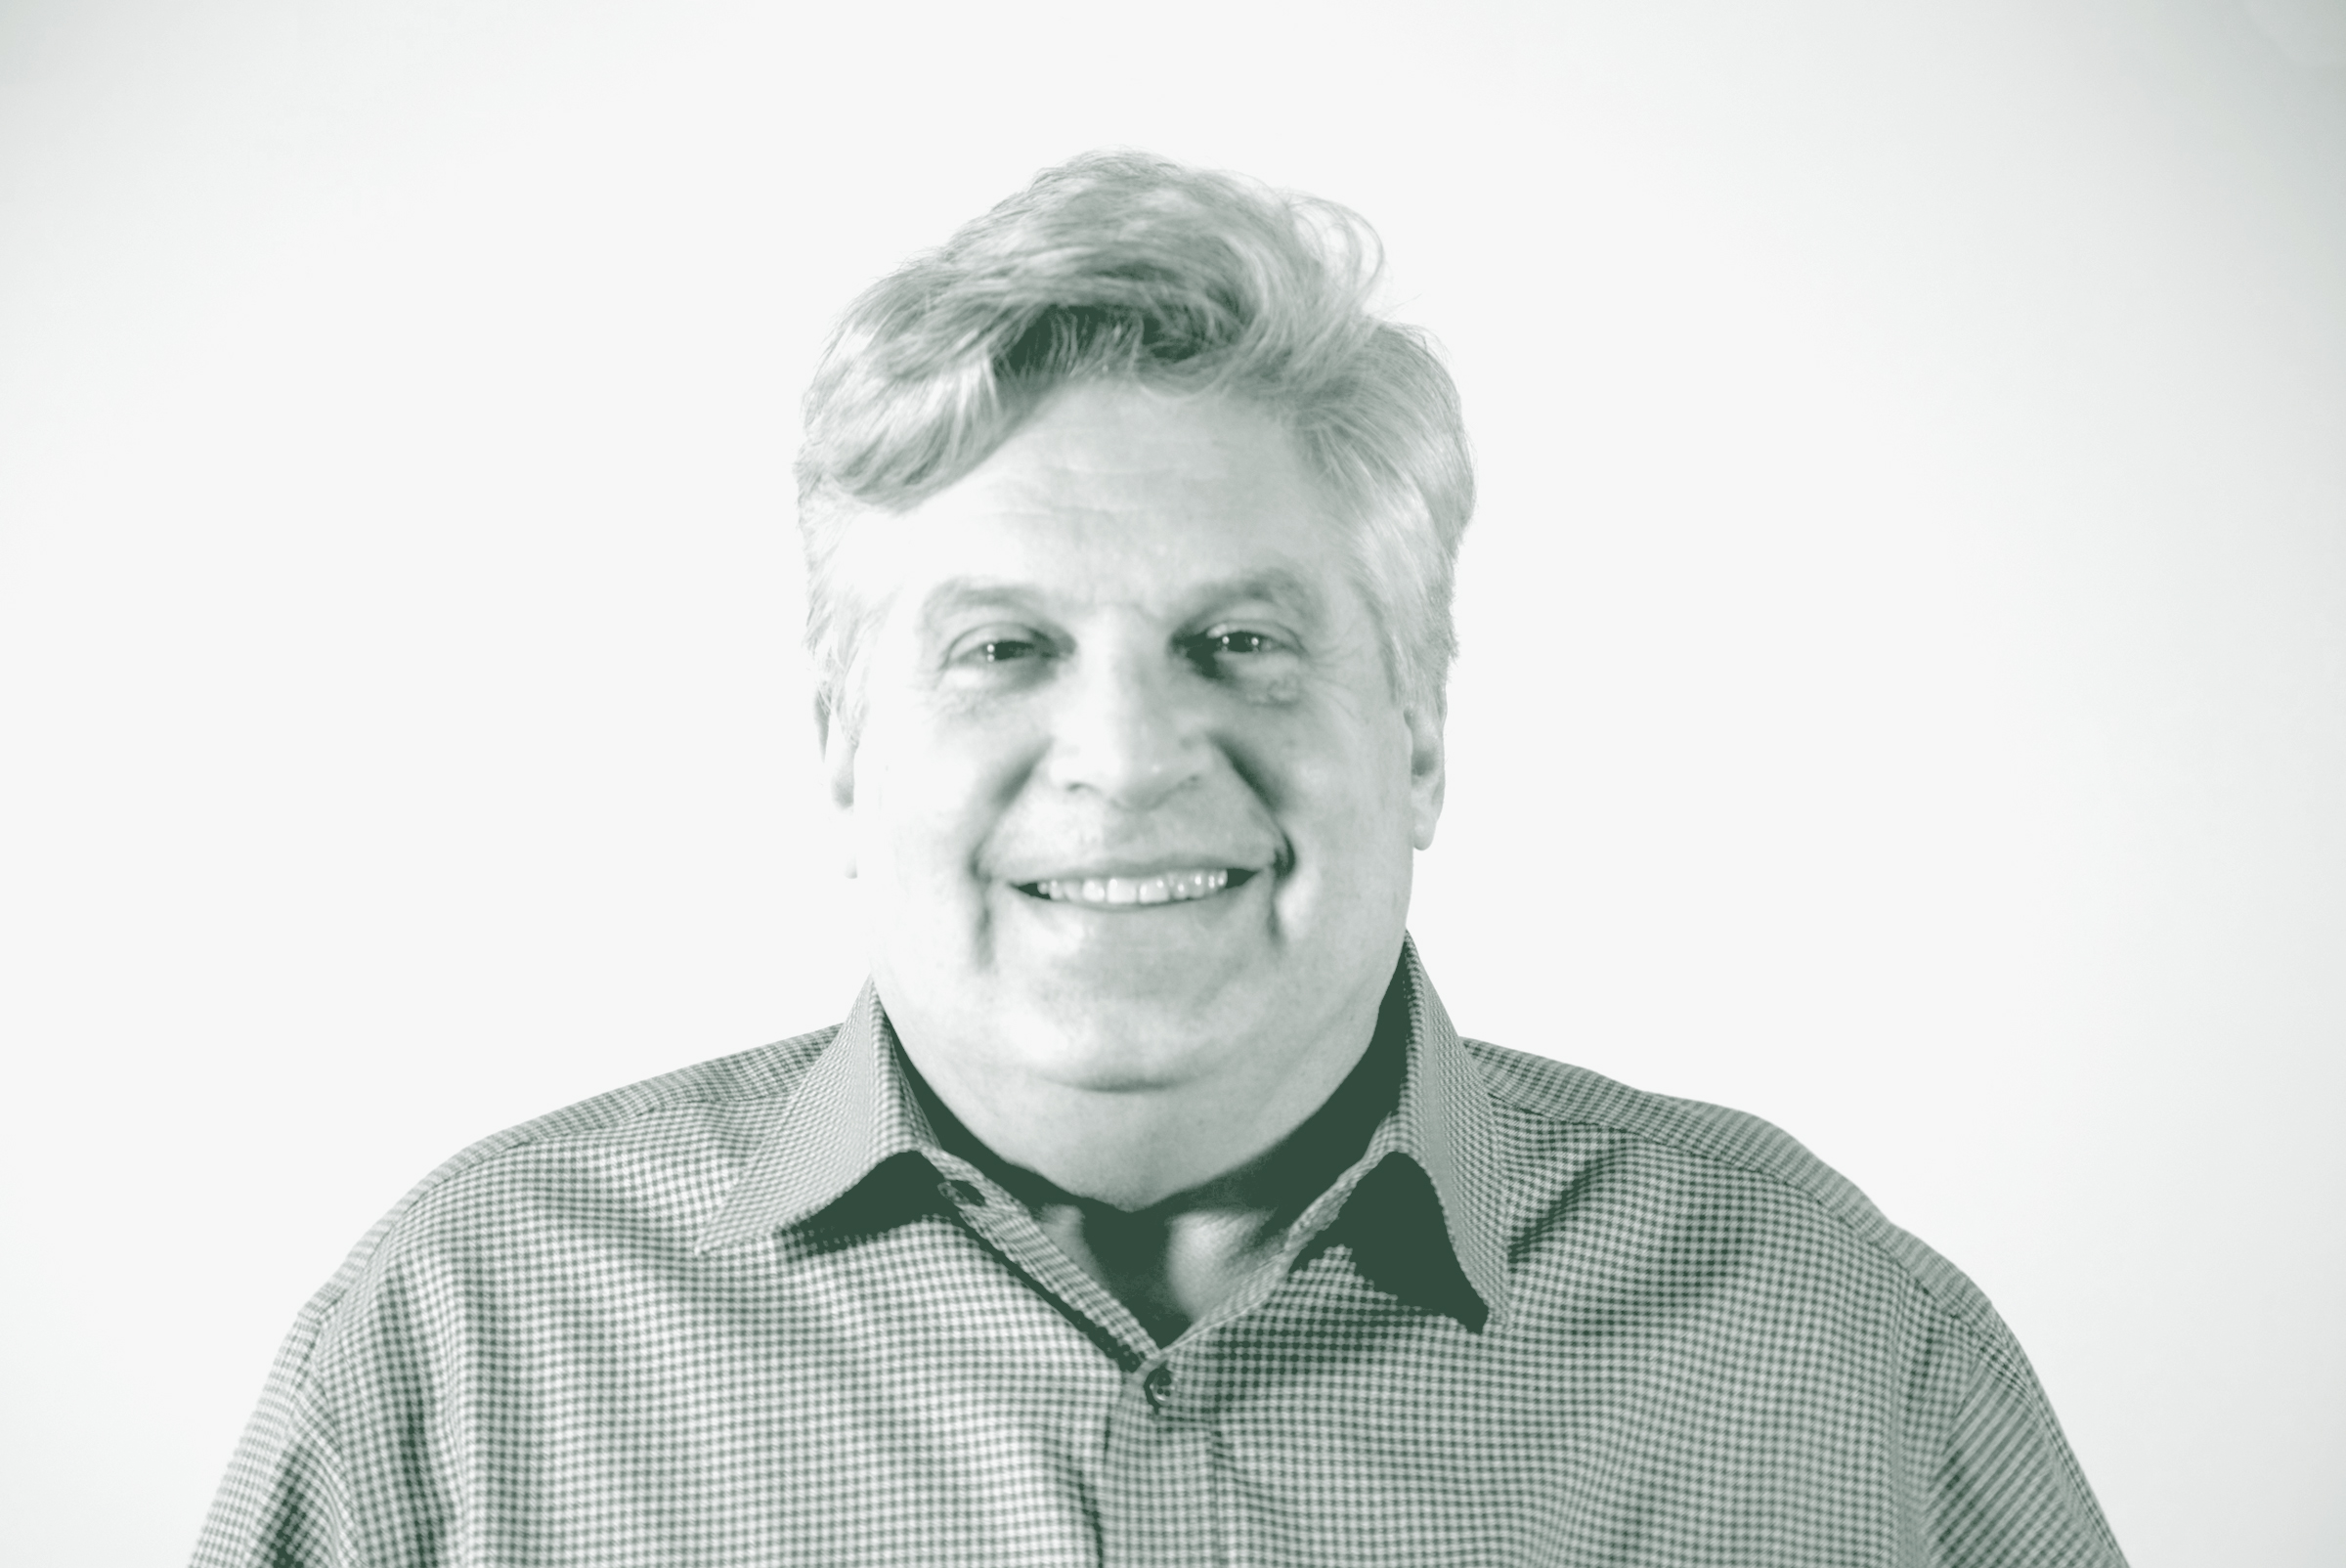 A black and white portrait of Lance Braht, an Associate Principal and Senior Design Leader with GFF, in front of a white background.